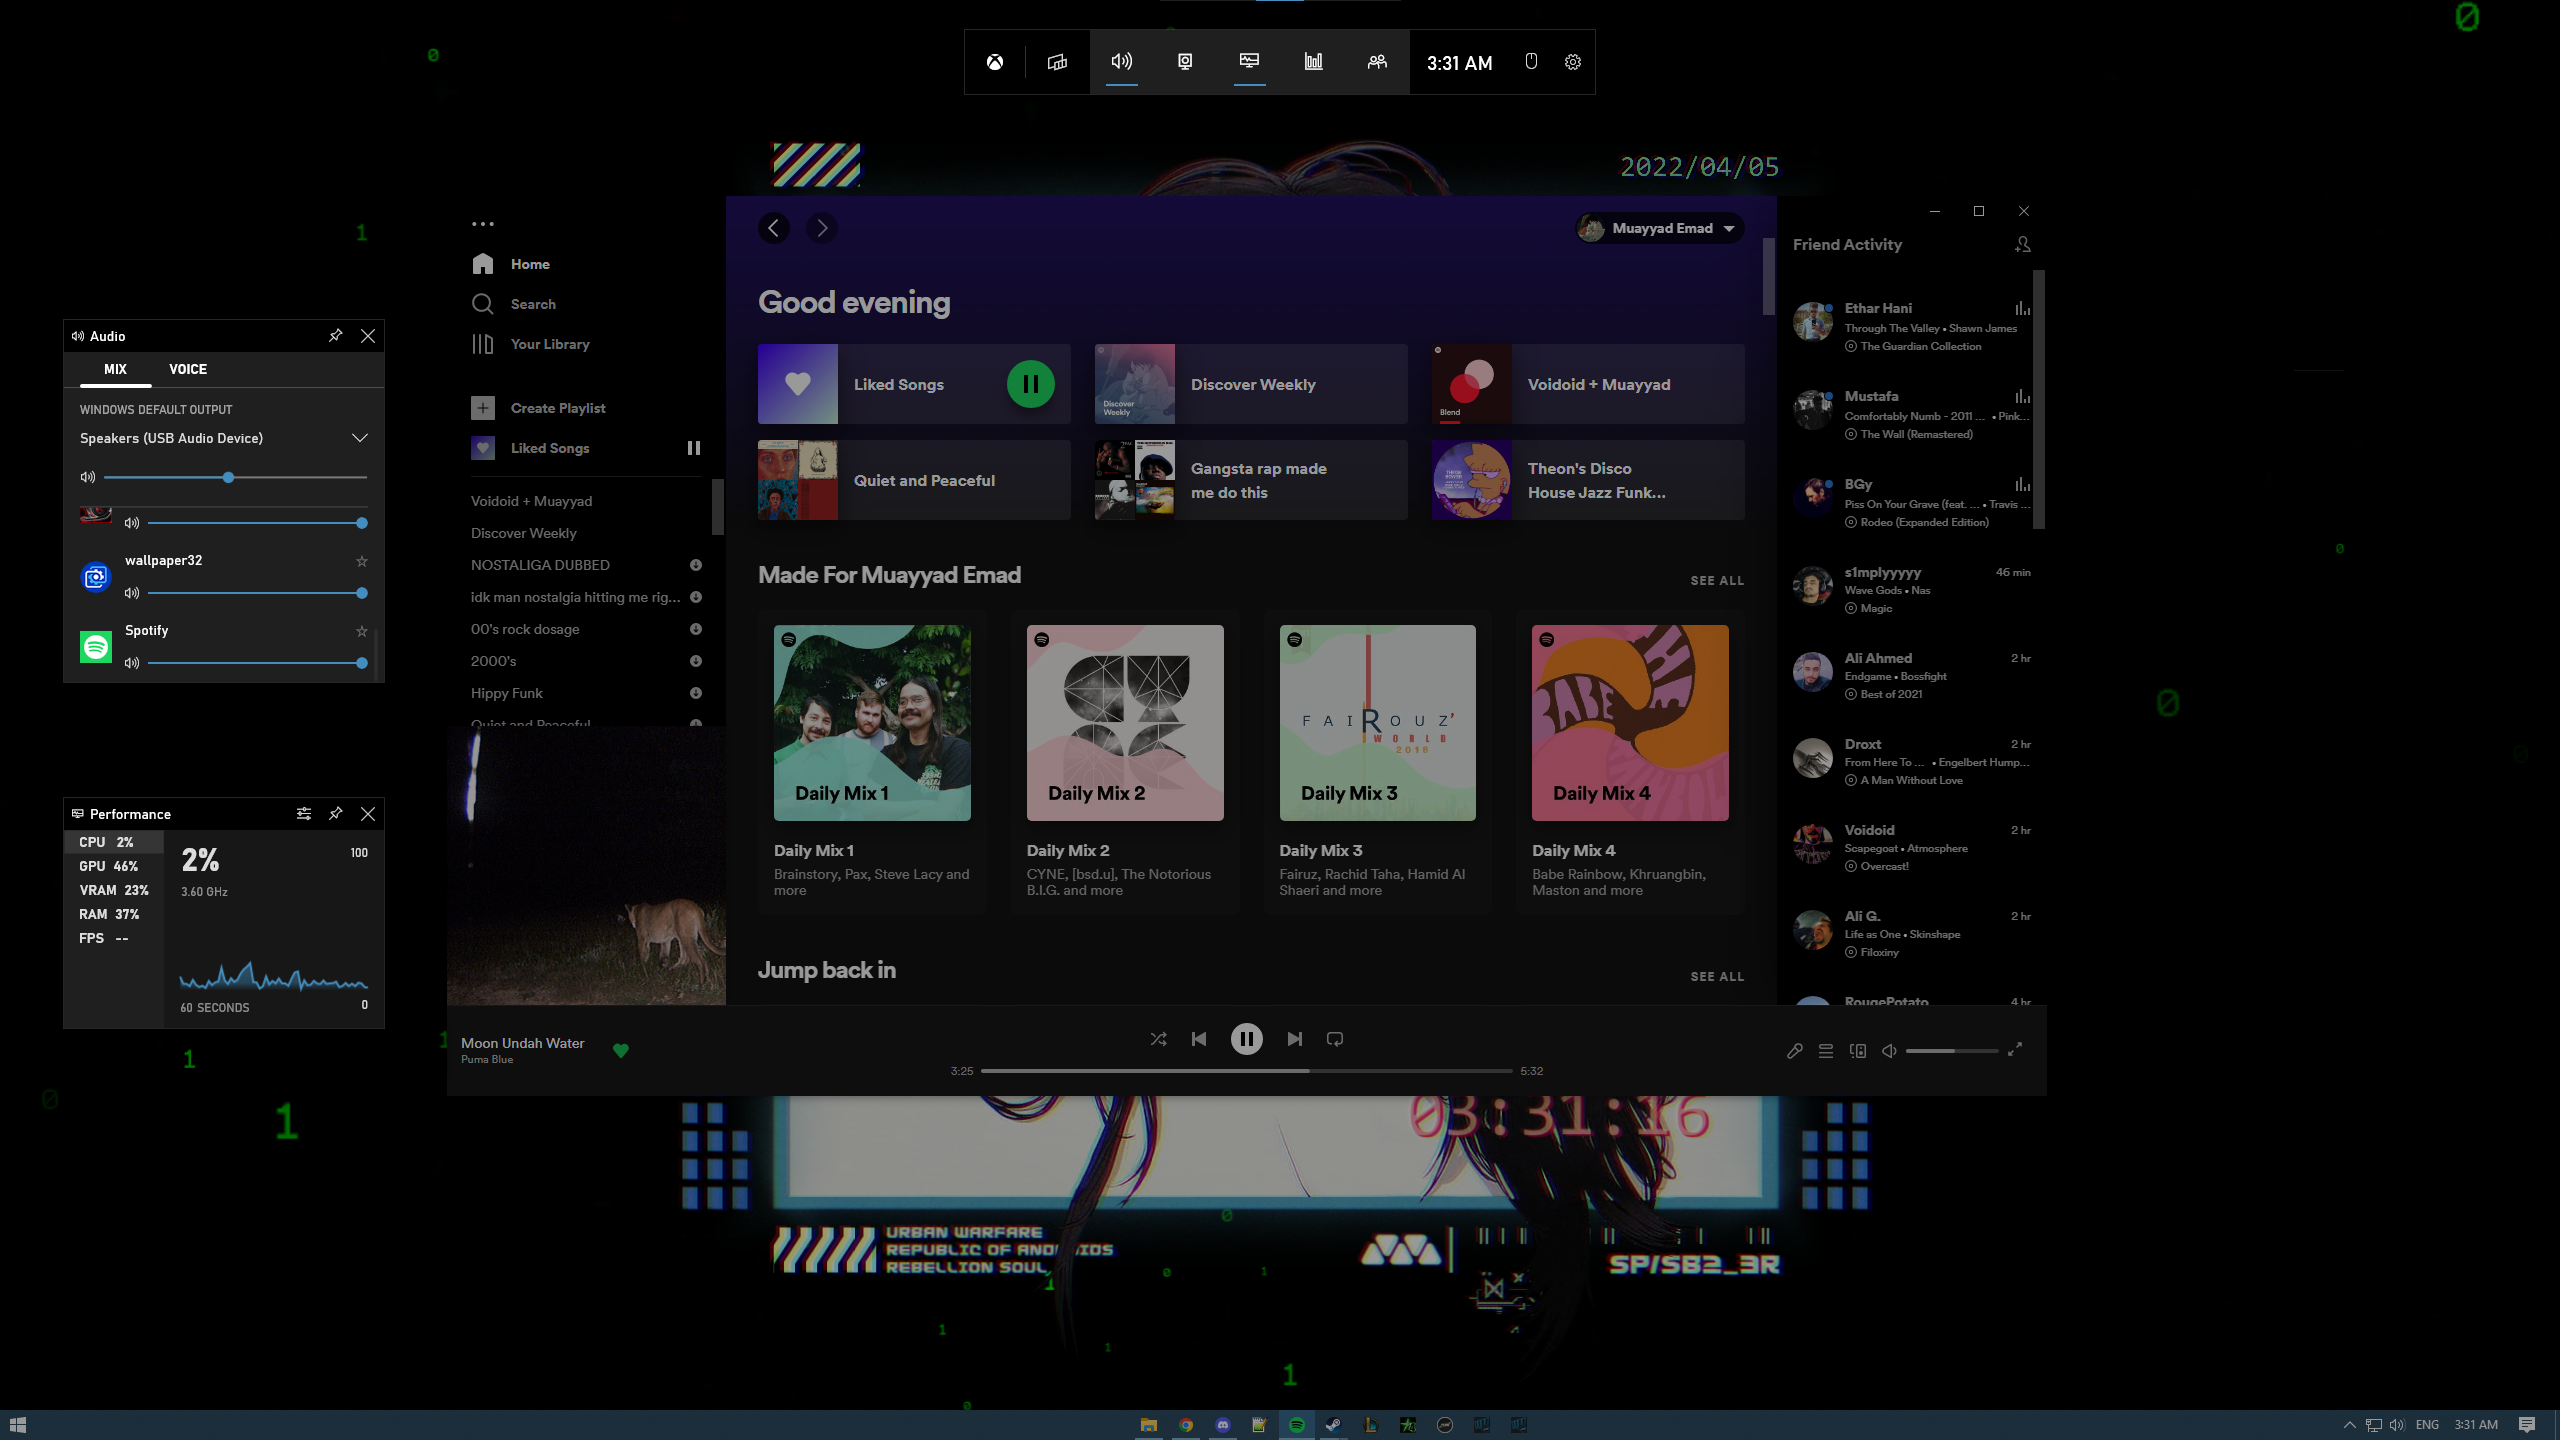 Windows 10 Xbox game bar adds chat and Spotify integration